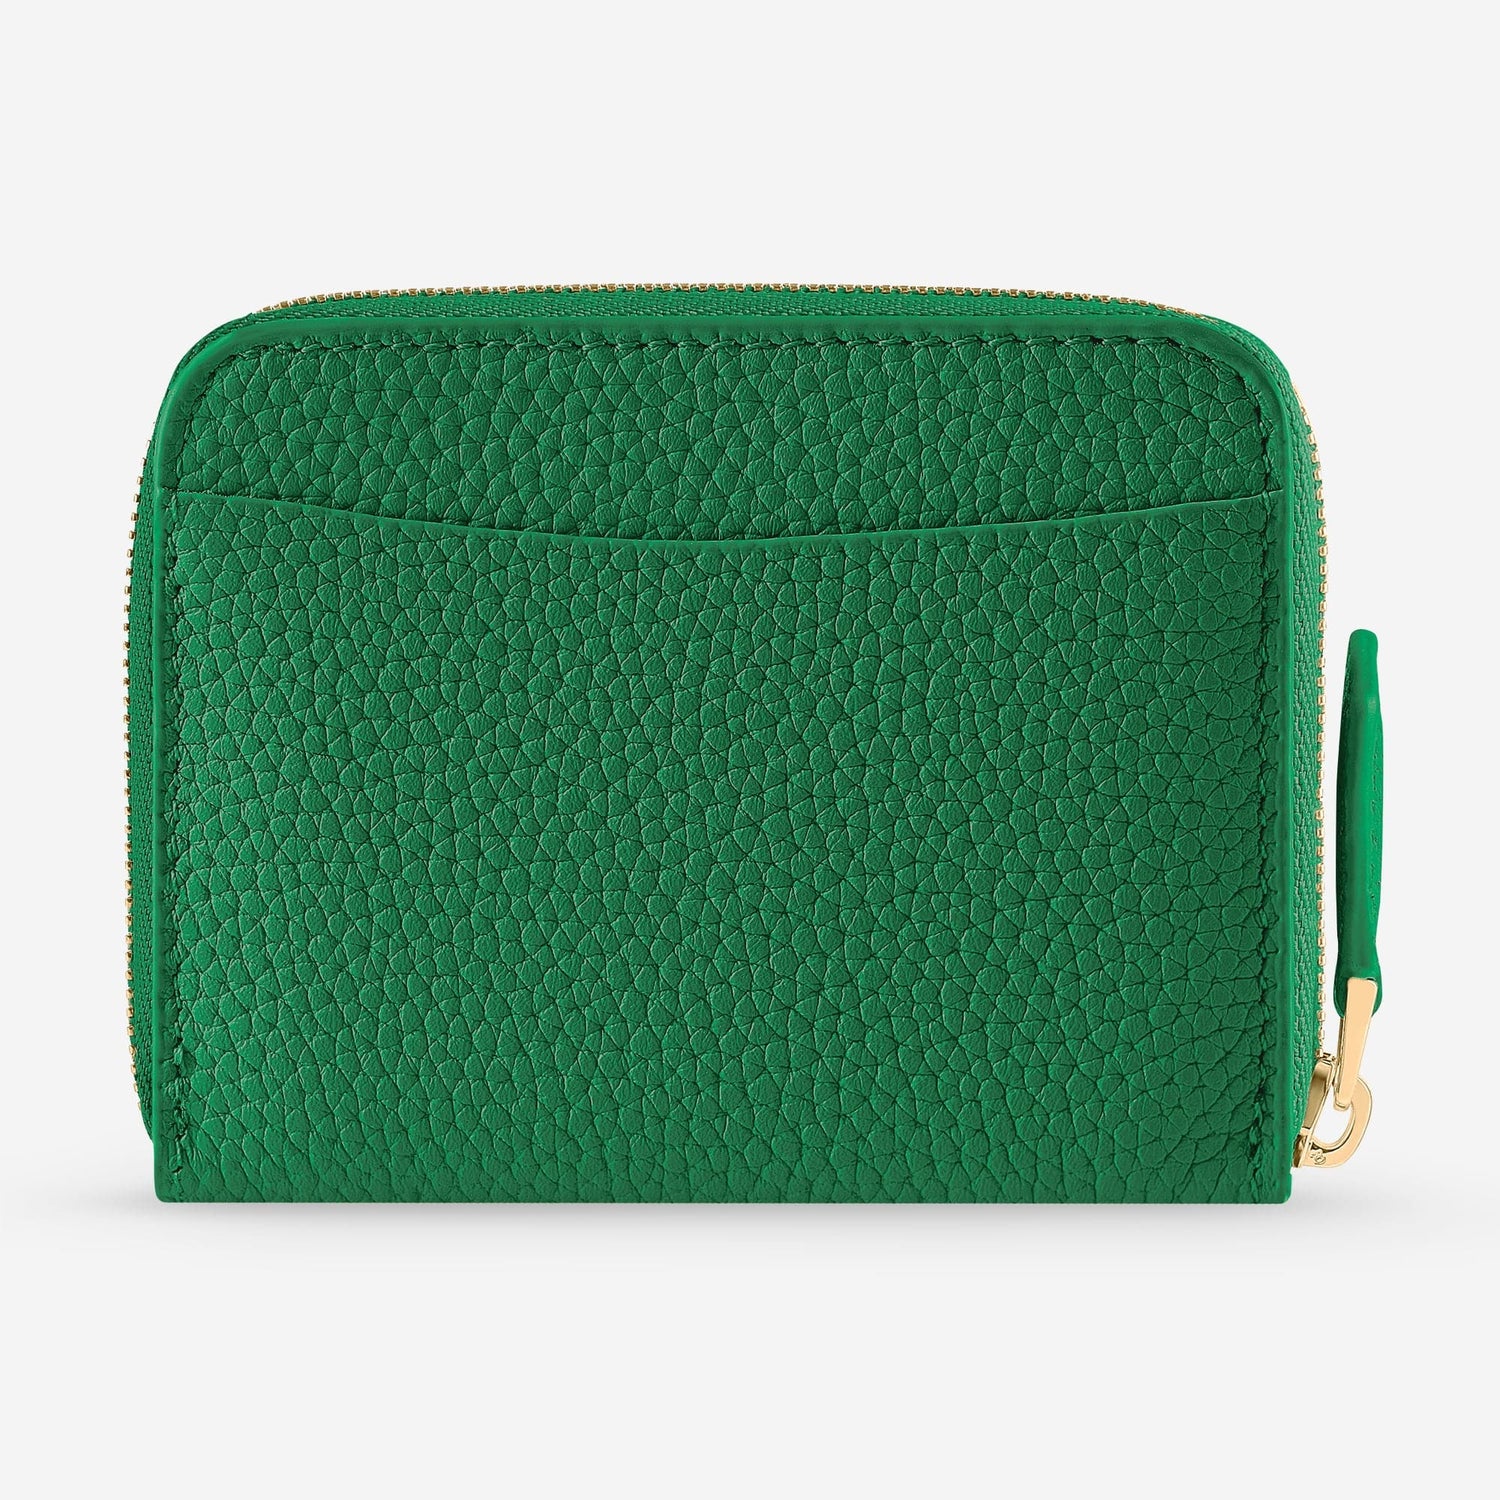 Buy Green Elephant Coin Purse Online - Accessorize India